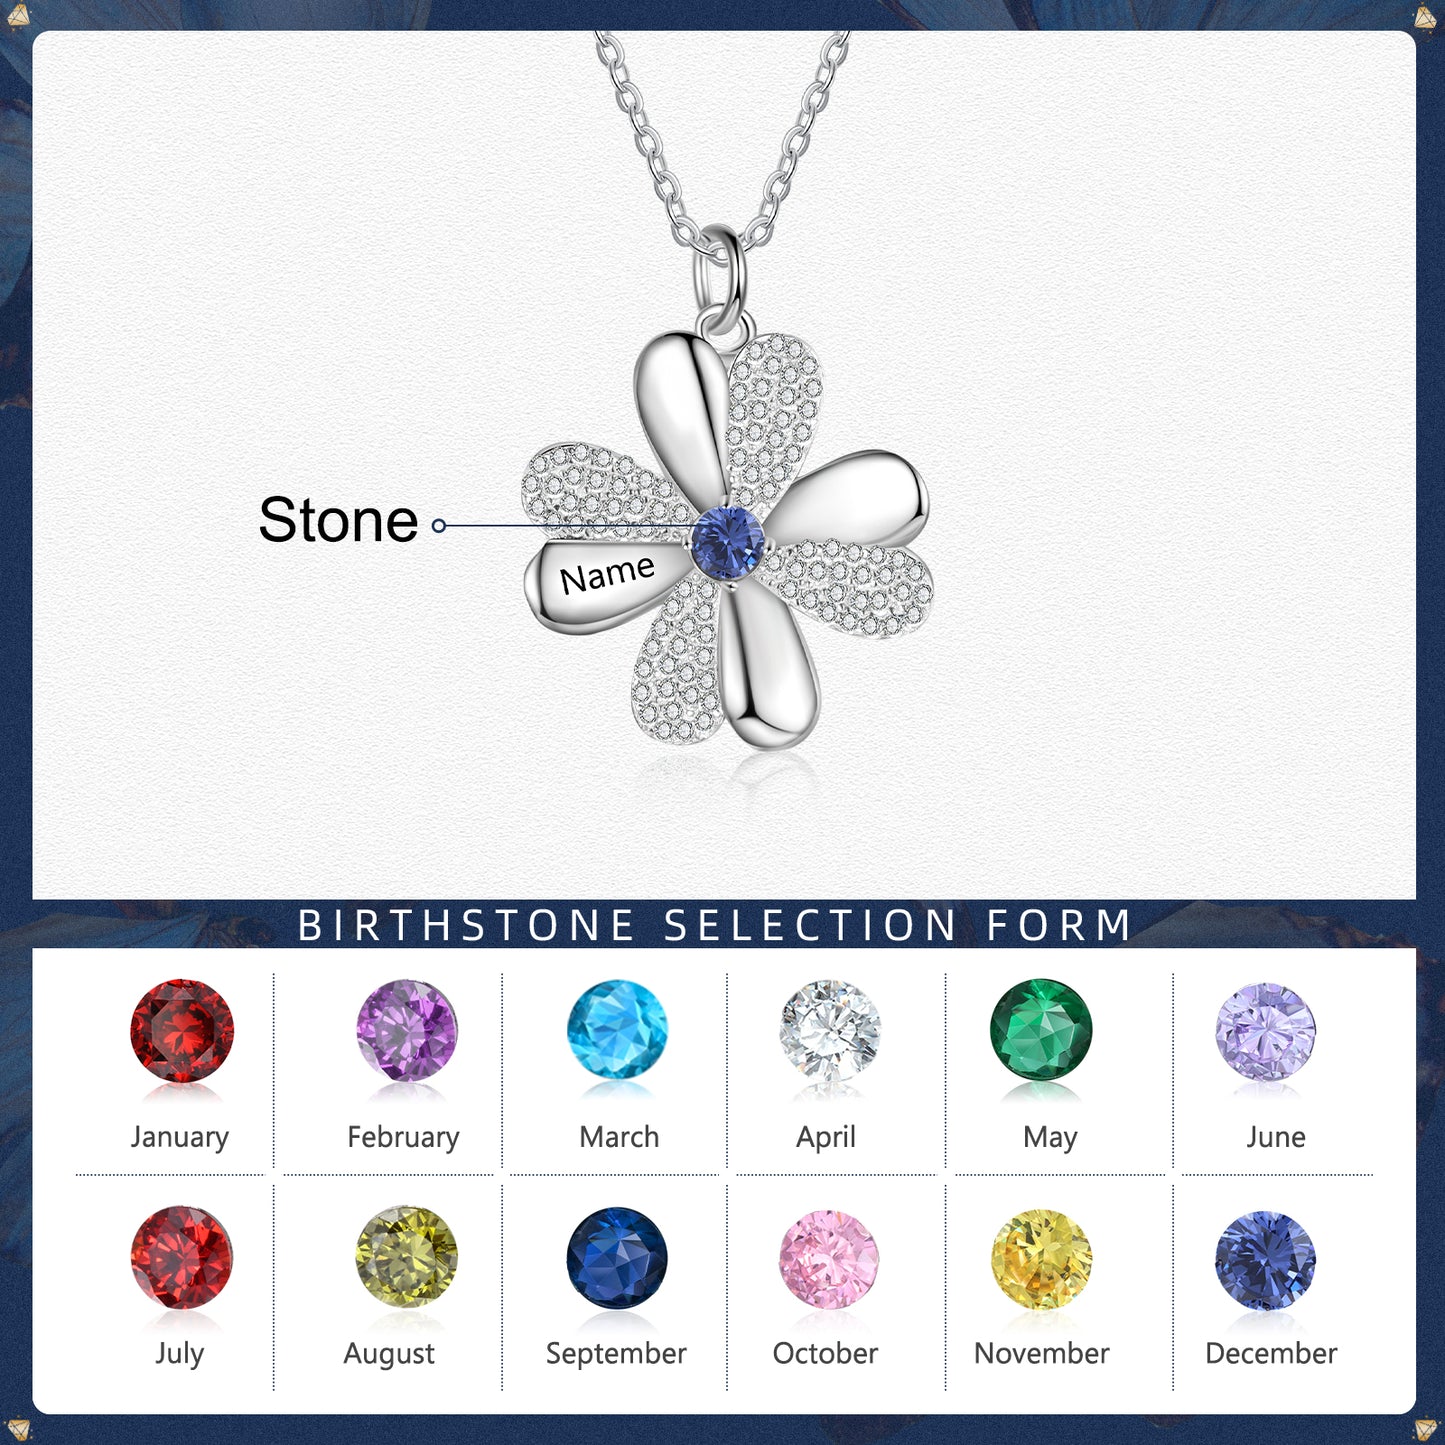 Wholesale Price Personalized 925 Sterling Silver Clover Necklace